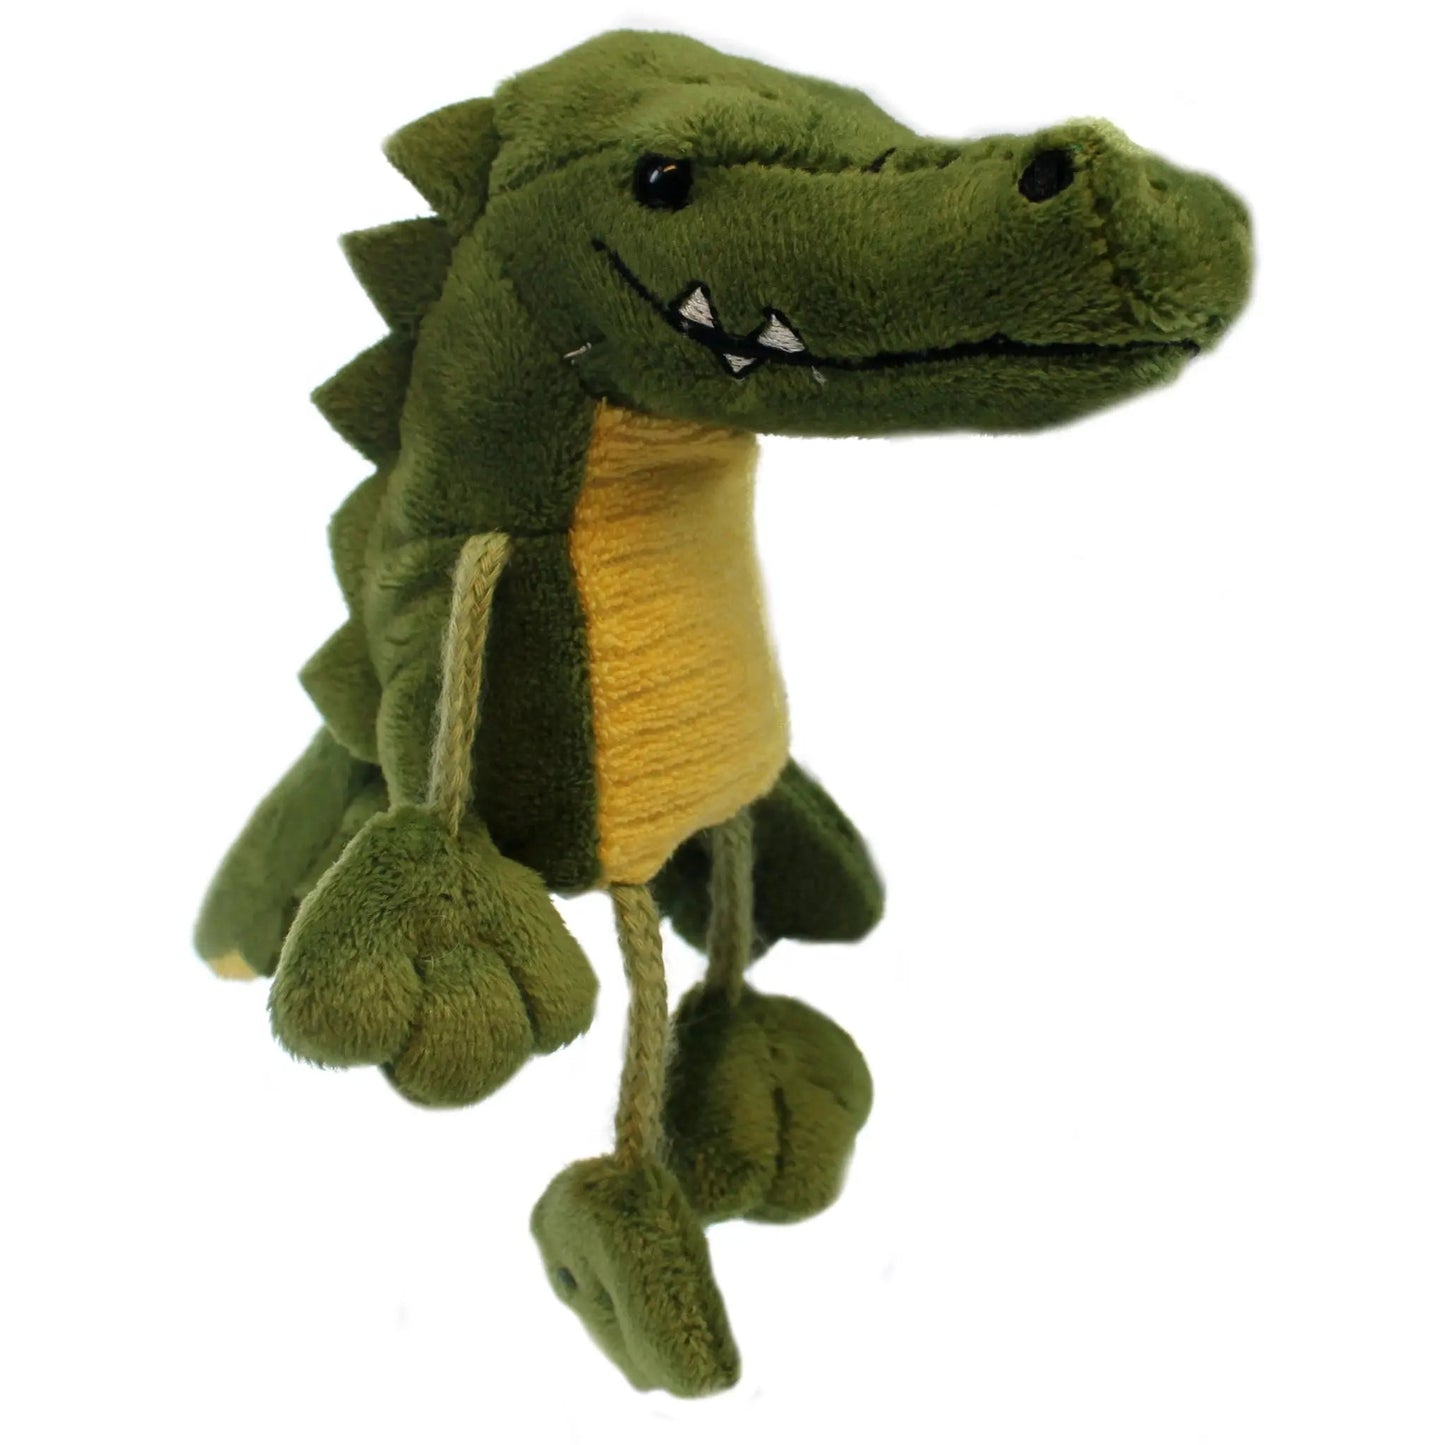 Crocodile Finger Puppet - The Puppet Company - The Forgotten Toy Shop